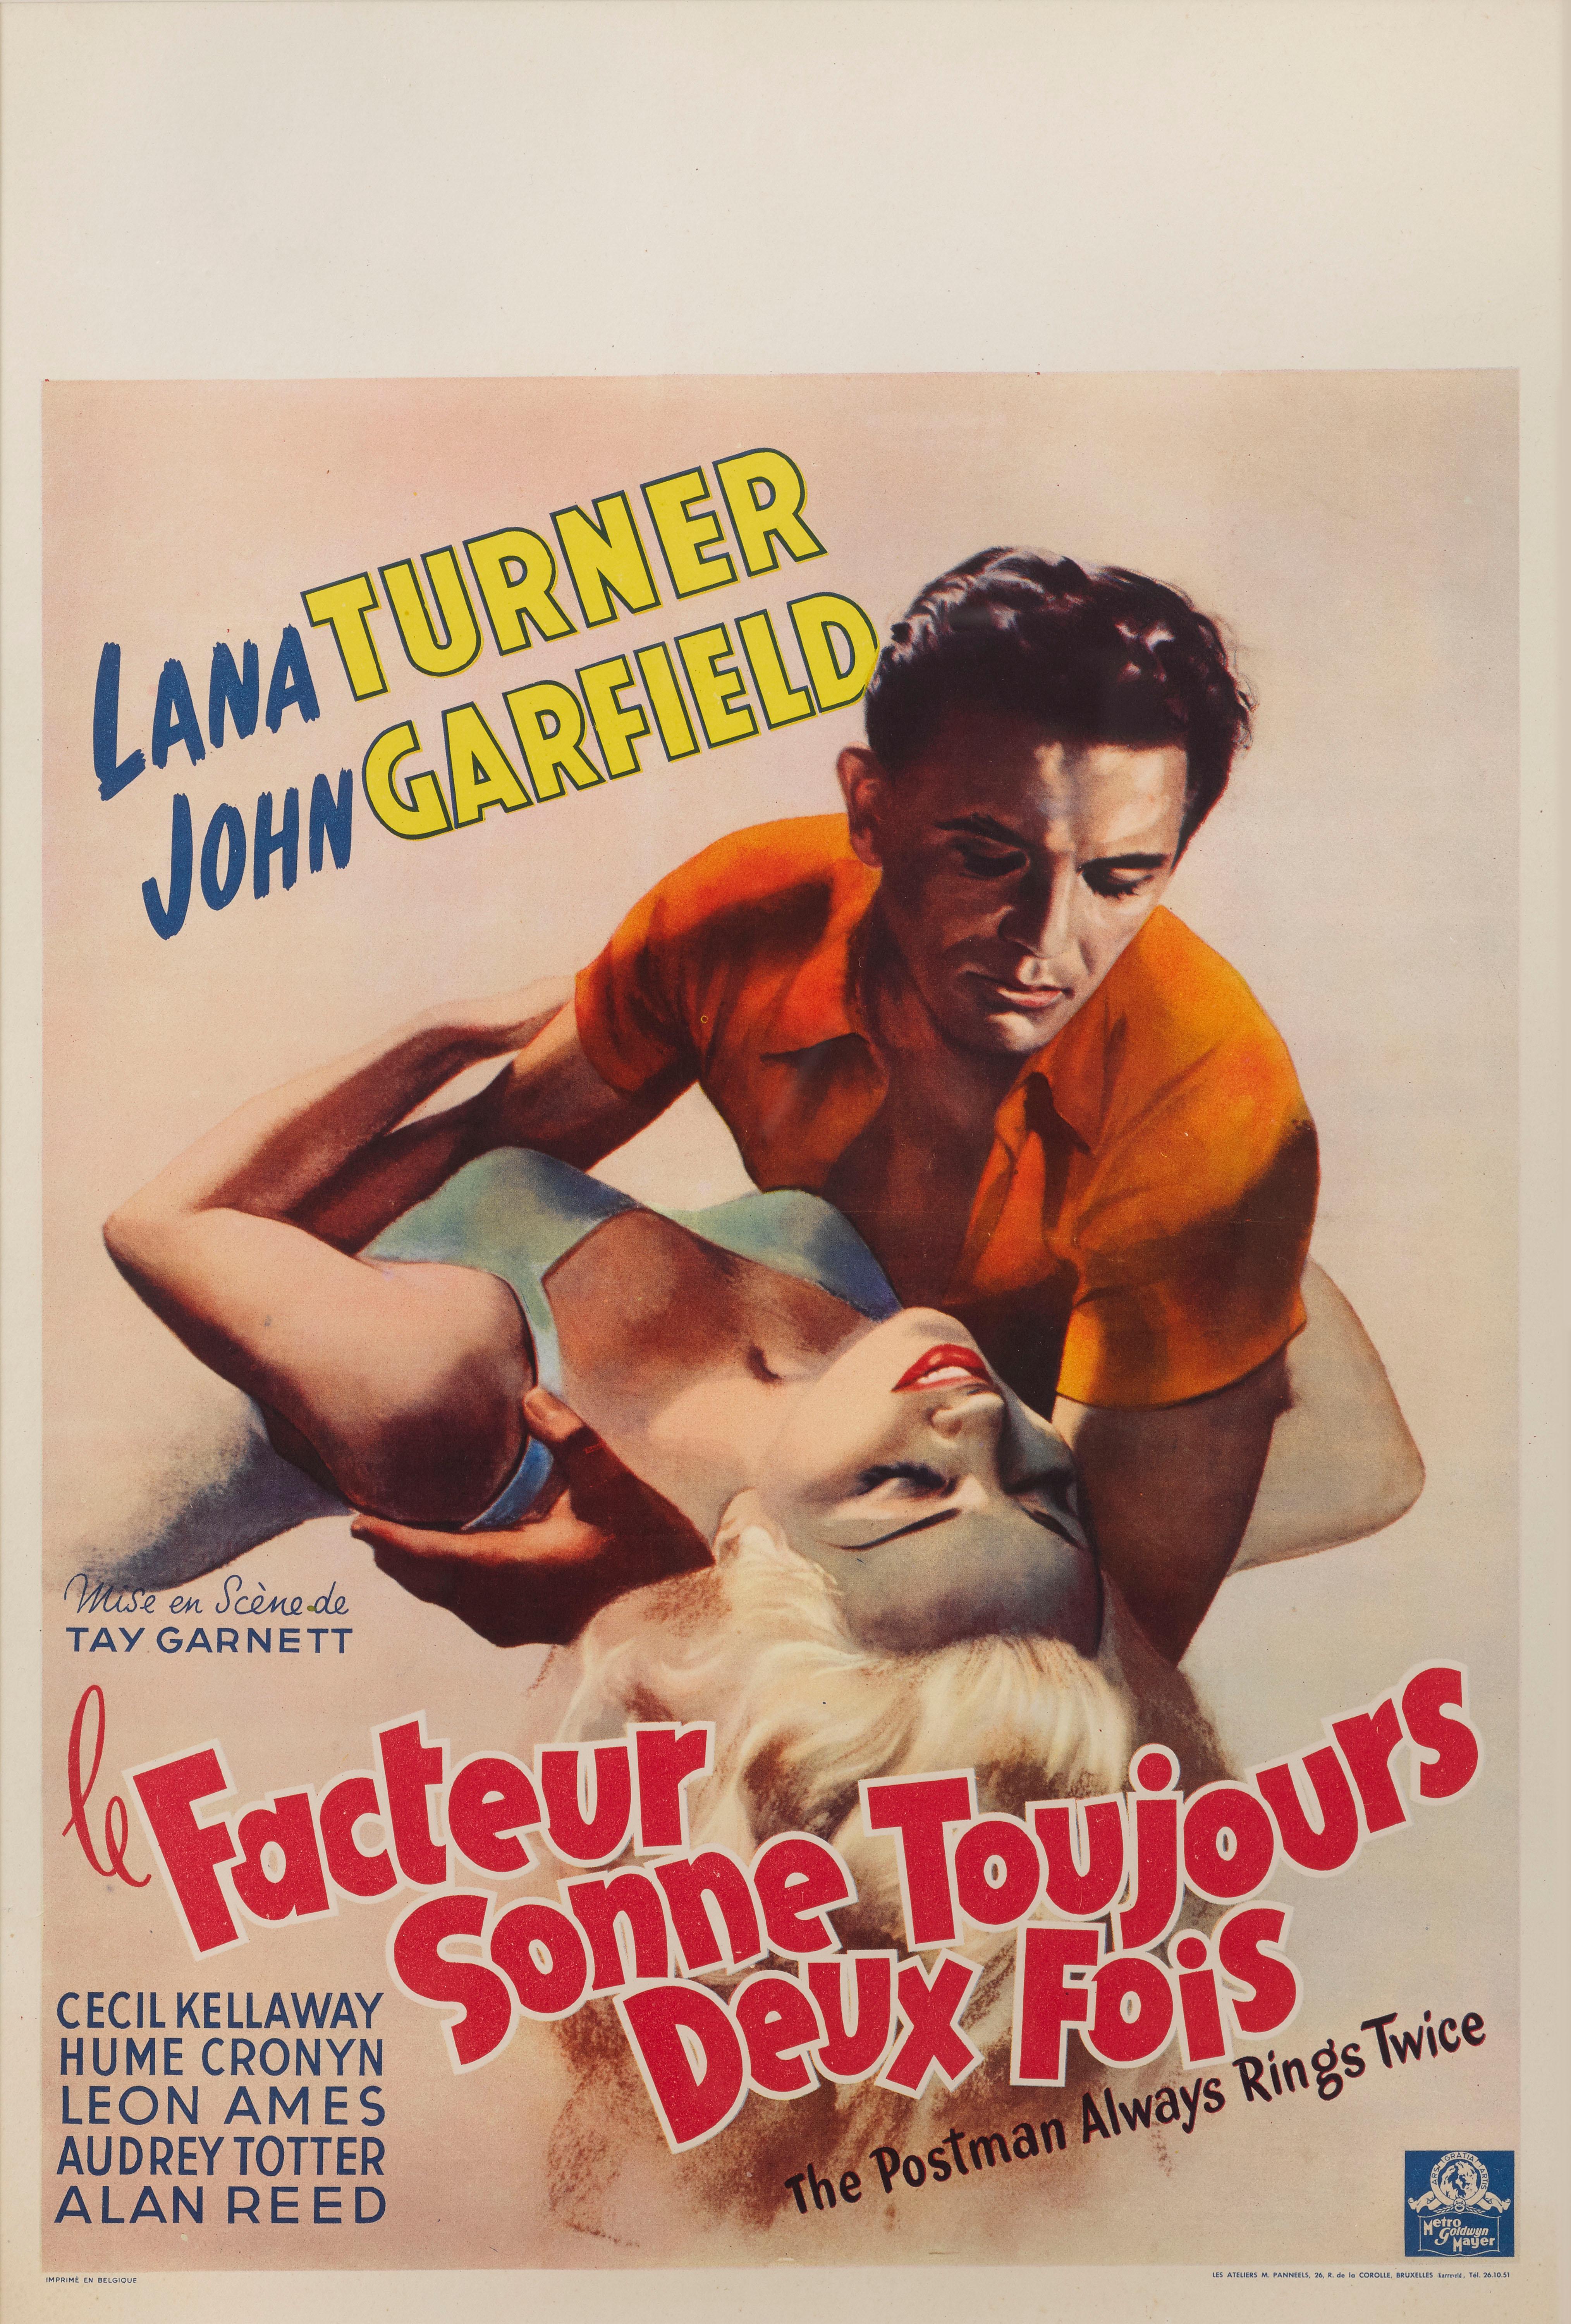 Original Belgian film poster for The Postman Always Rings Twice 1946.
This American film noir is based James M. Cain novel of the same name. The film was directed by Tay Garnett, and stars Lana Turner and John Garfield. The film was re-made in 1981